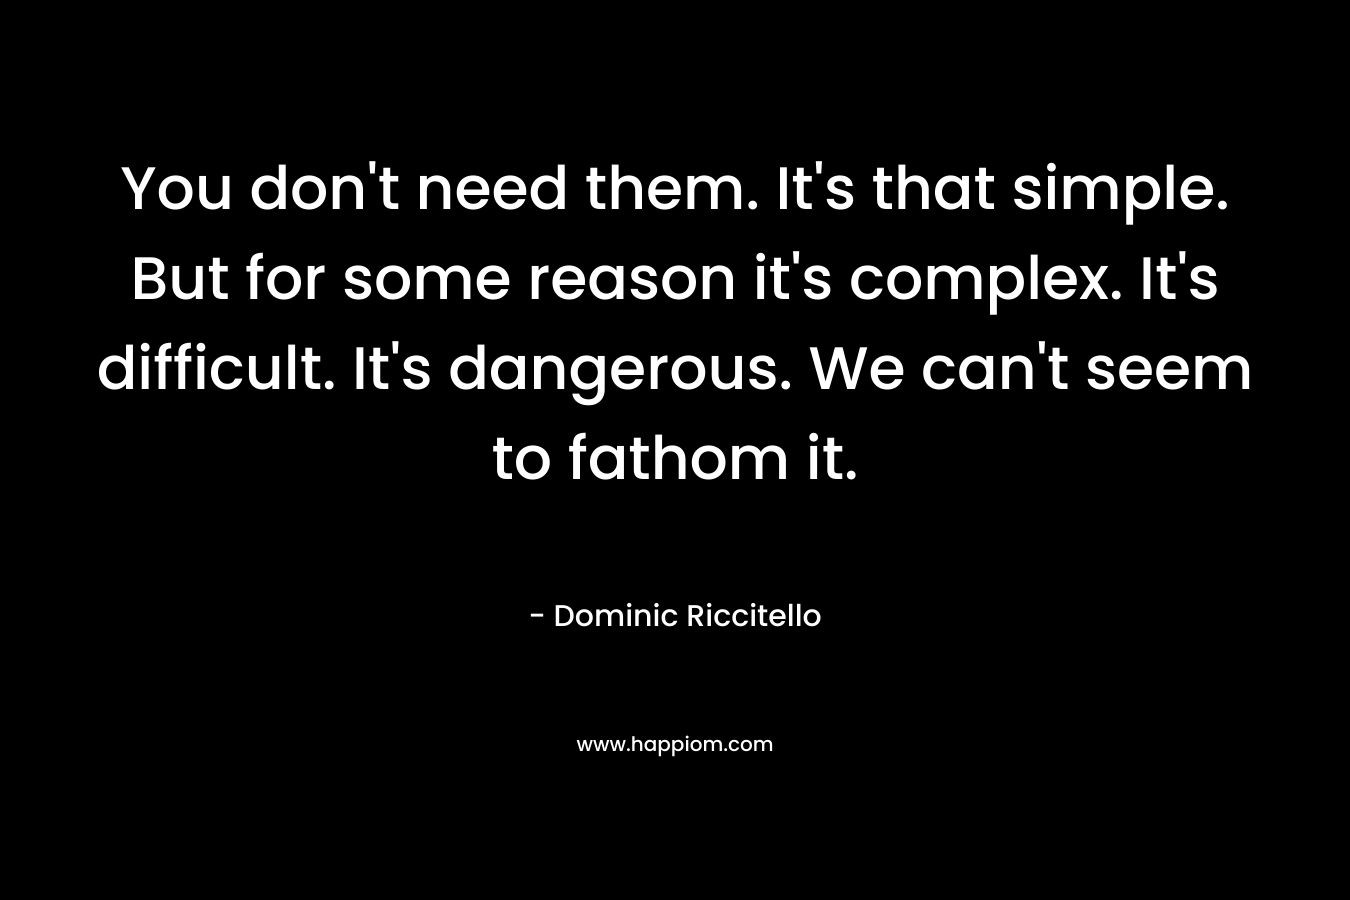 You don’t need them. It’s that simple. But for some reason it’s complex. It’s difficult. It’s dangerous. We can’t seem to fathom it. – Dominic Riccitello